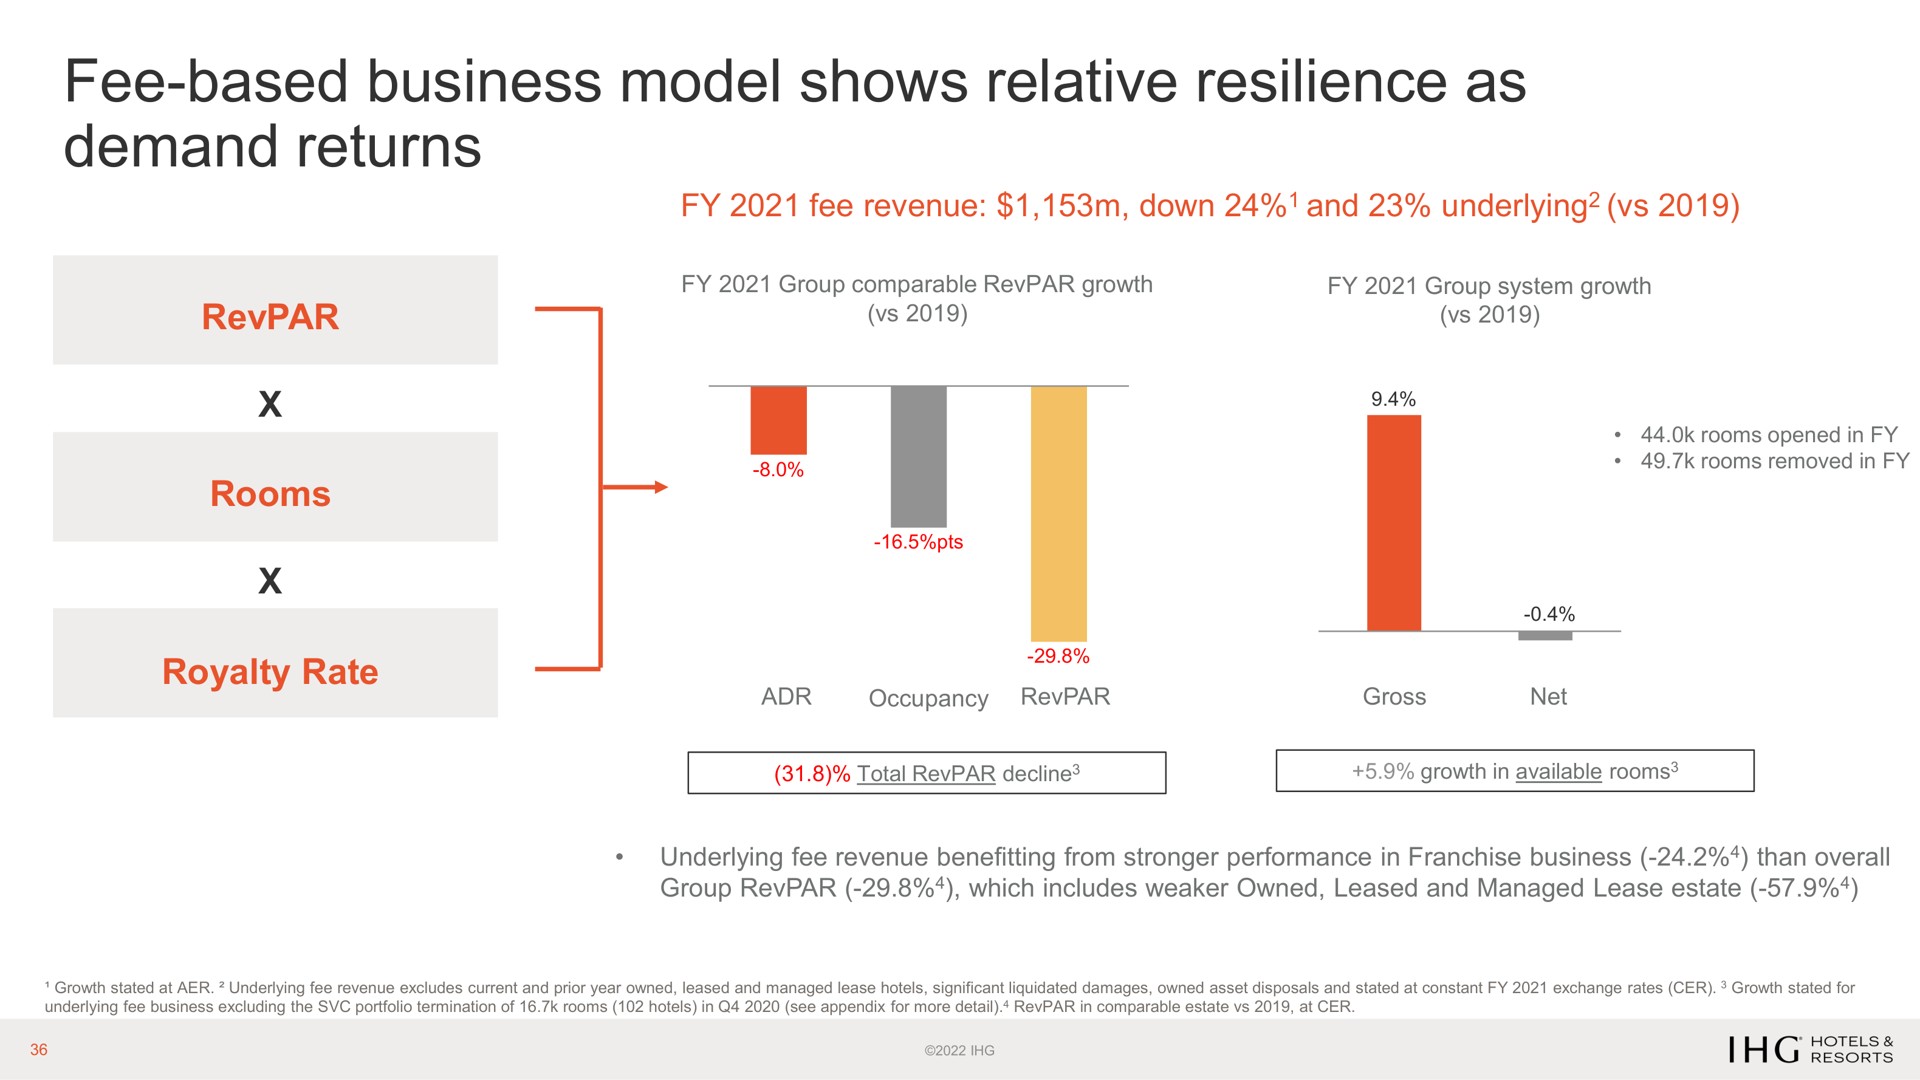 fee based business model shows relative resilience as demand returns | IHG Hotels